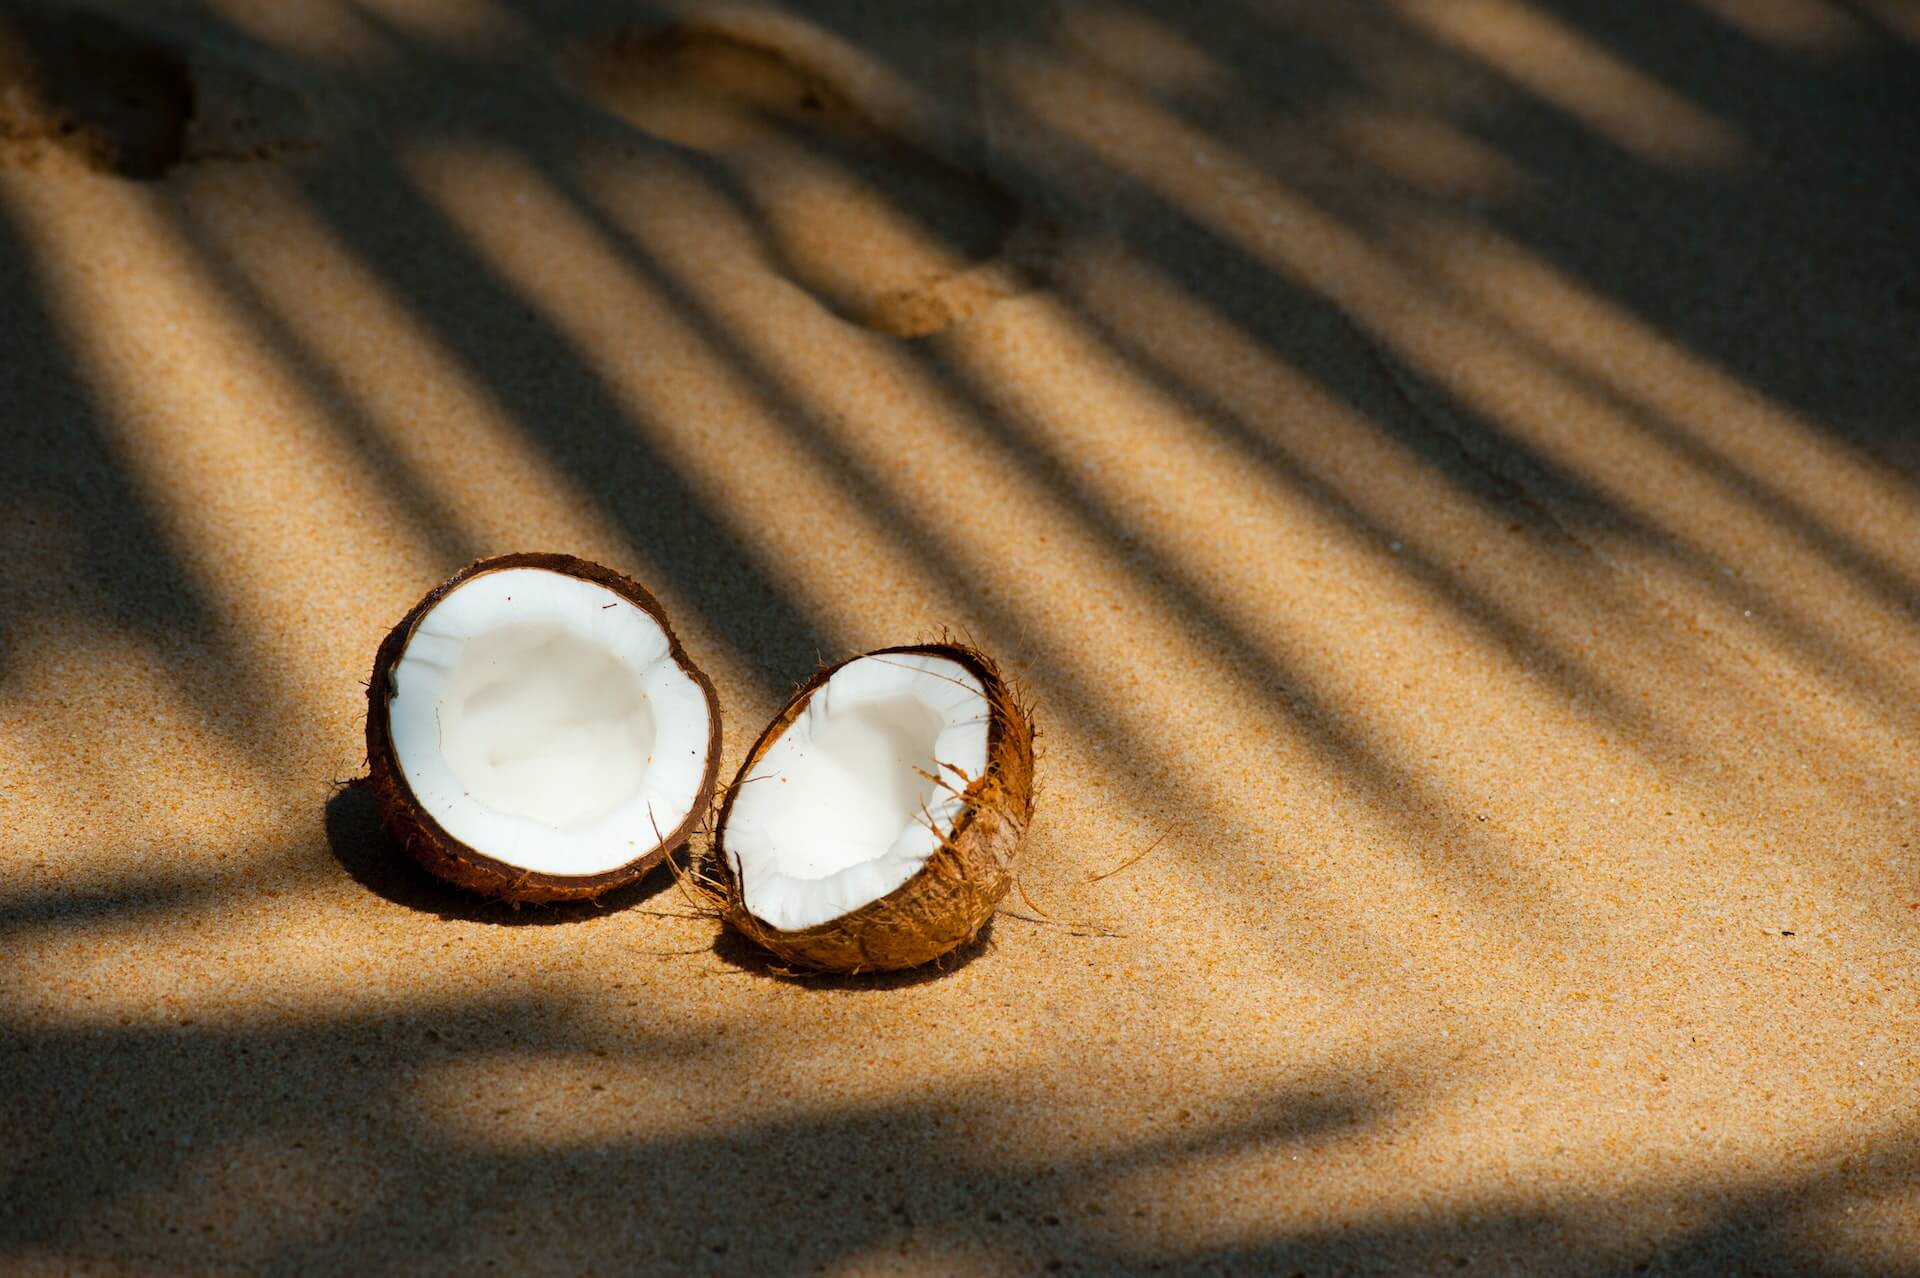 coconut in sand